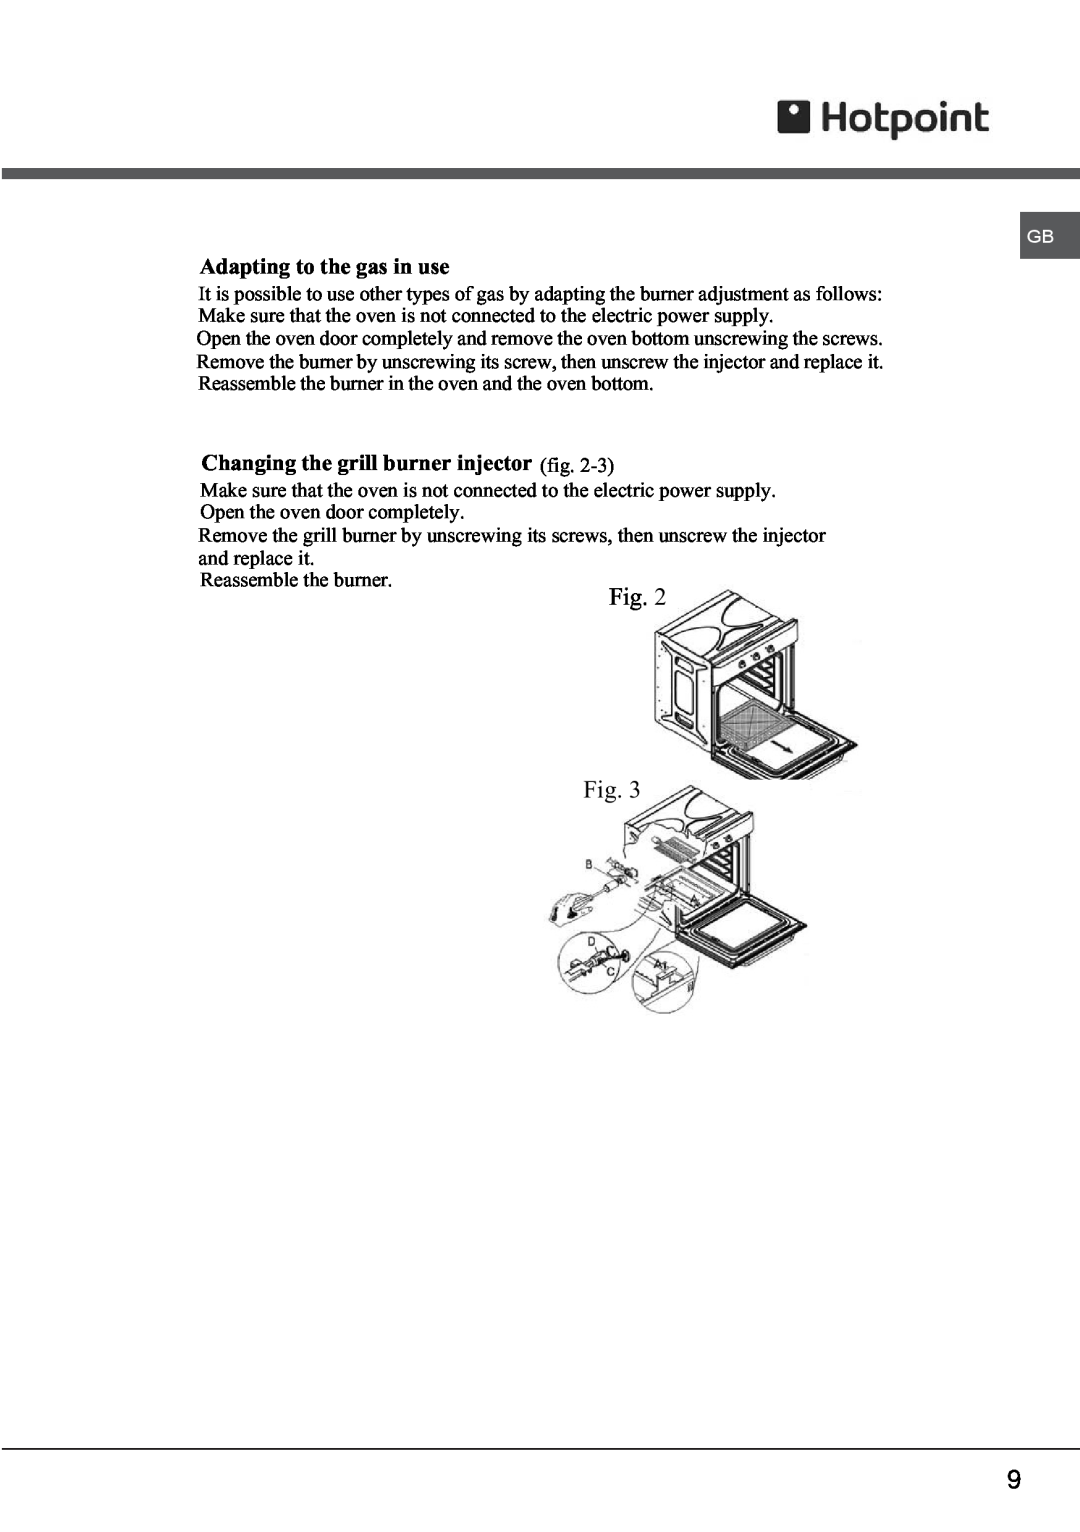 Hotpoint SY23 manual Fig. Fig, Adapting to the gas in use, Changing the grill burner injector fig 